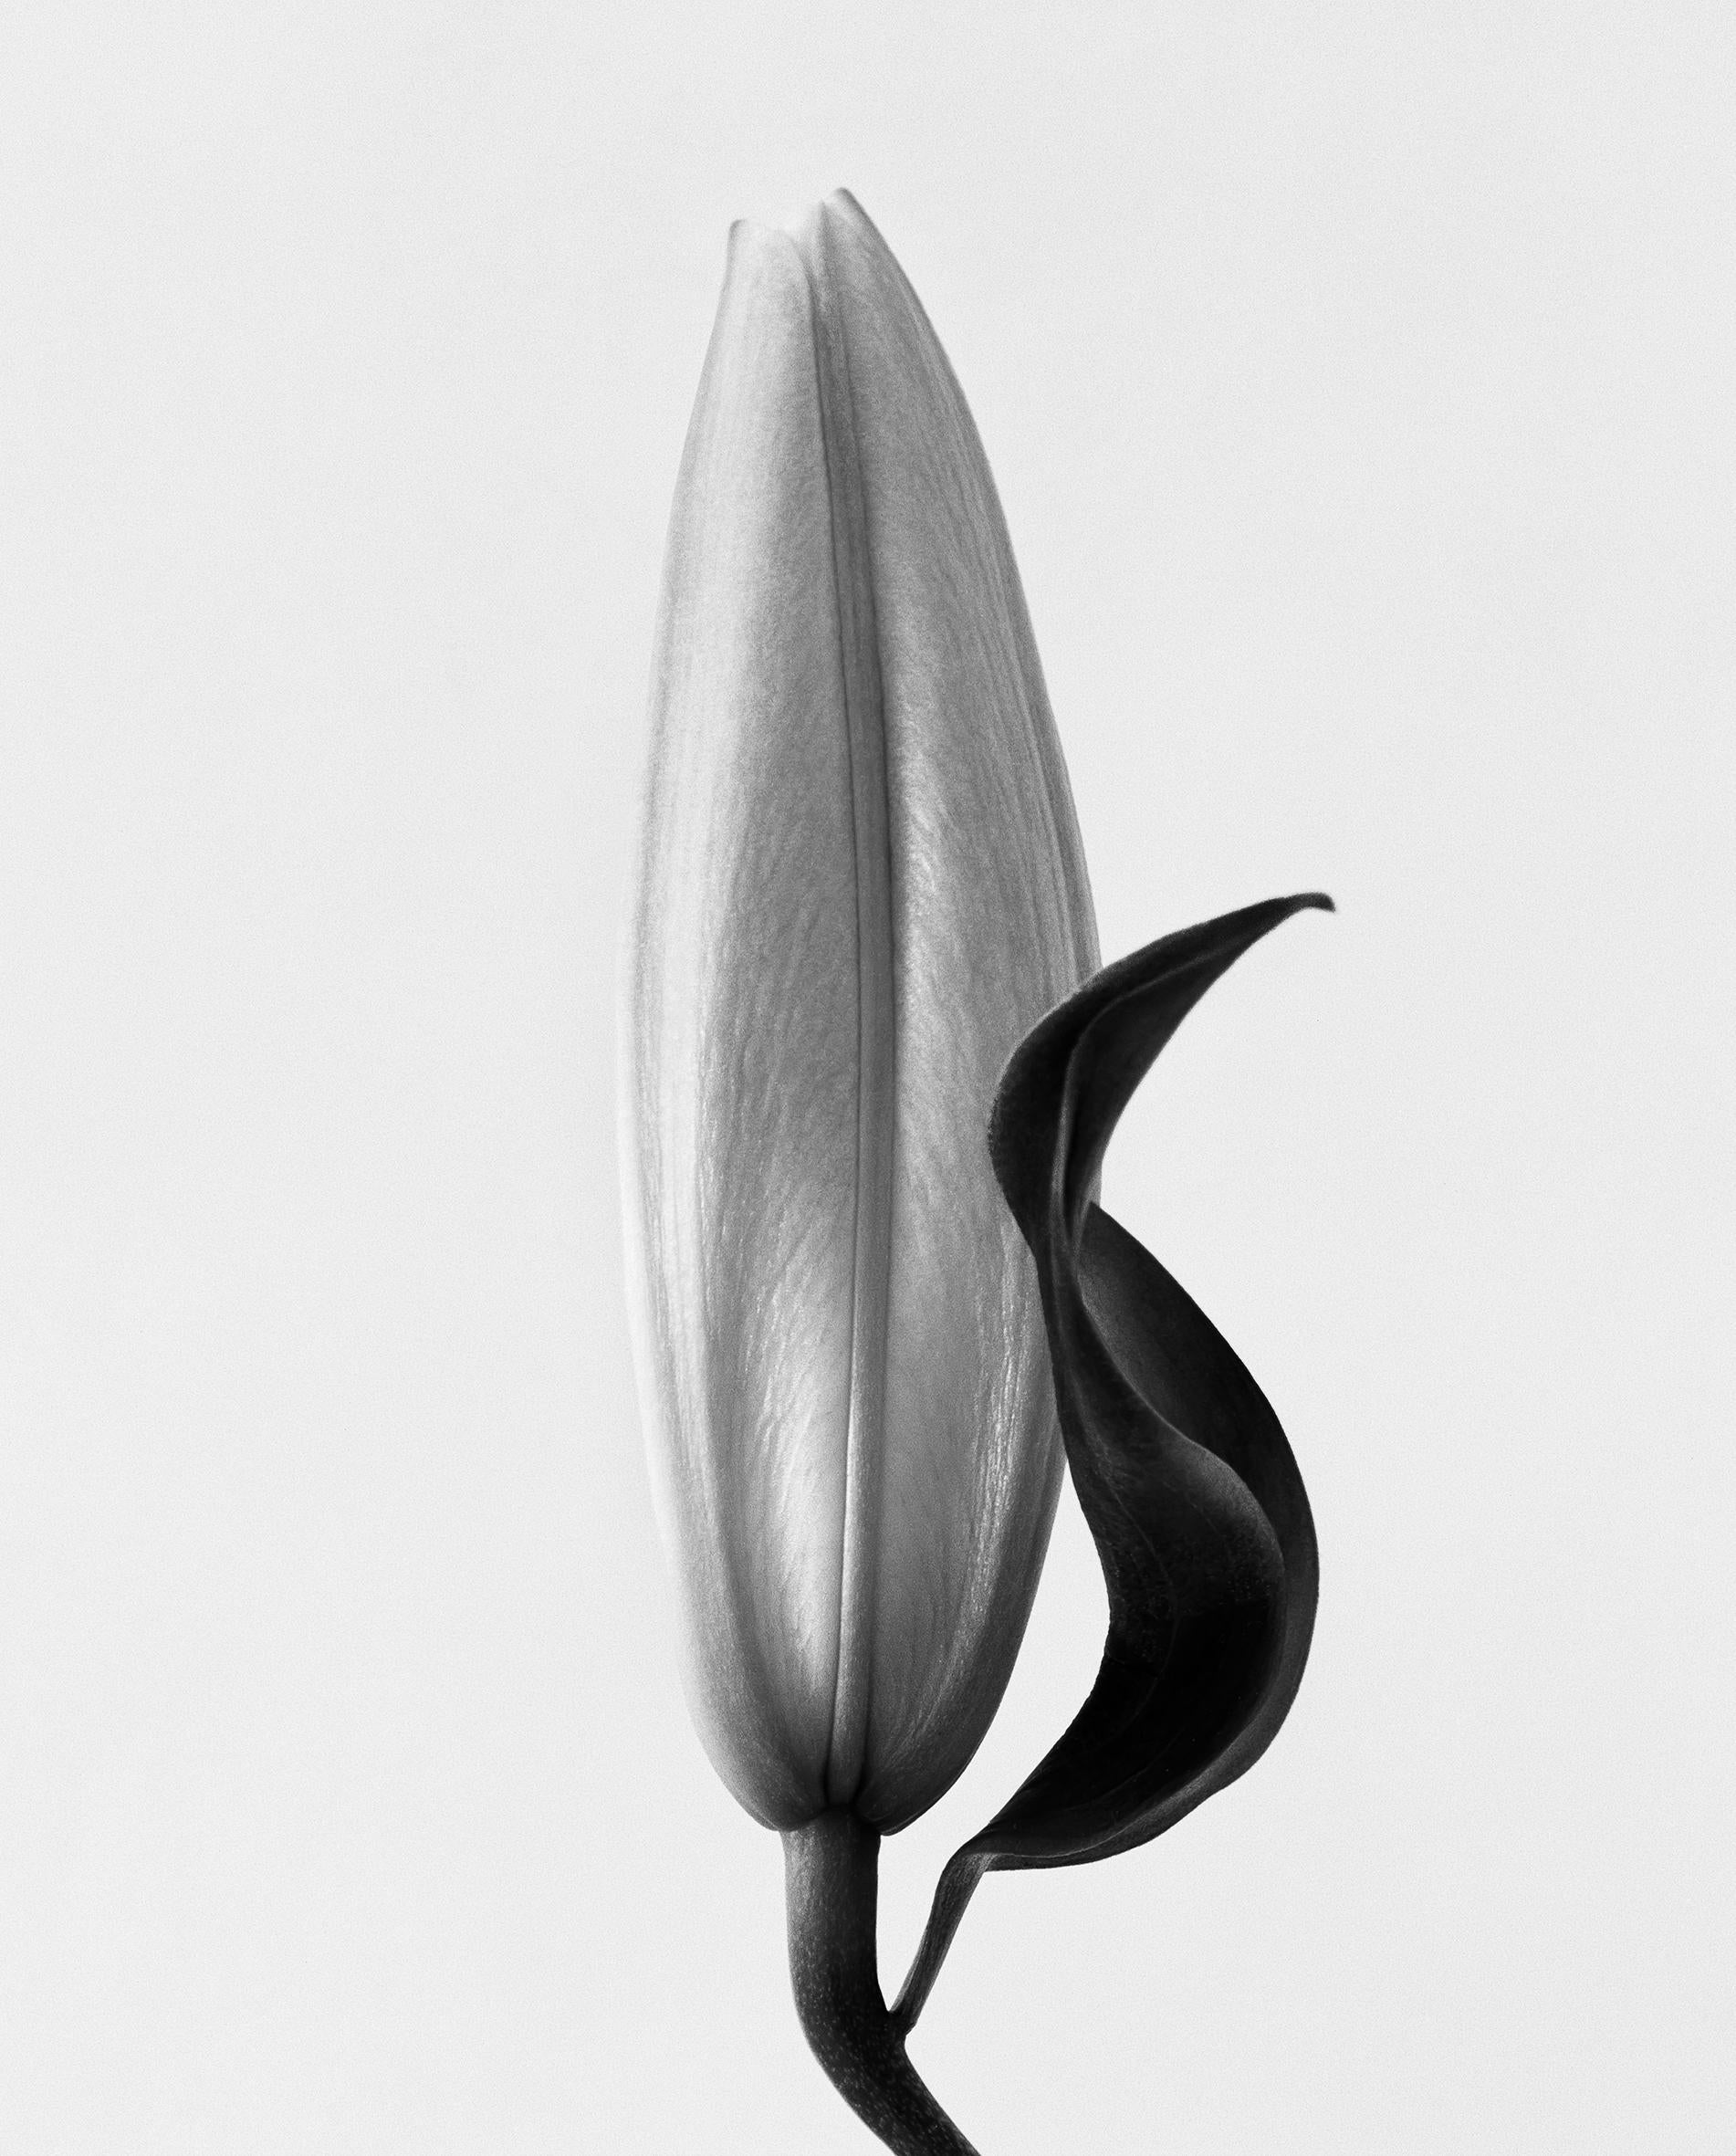 Lily No.2 black and white analogue floral photography edition of 10